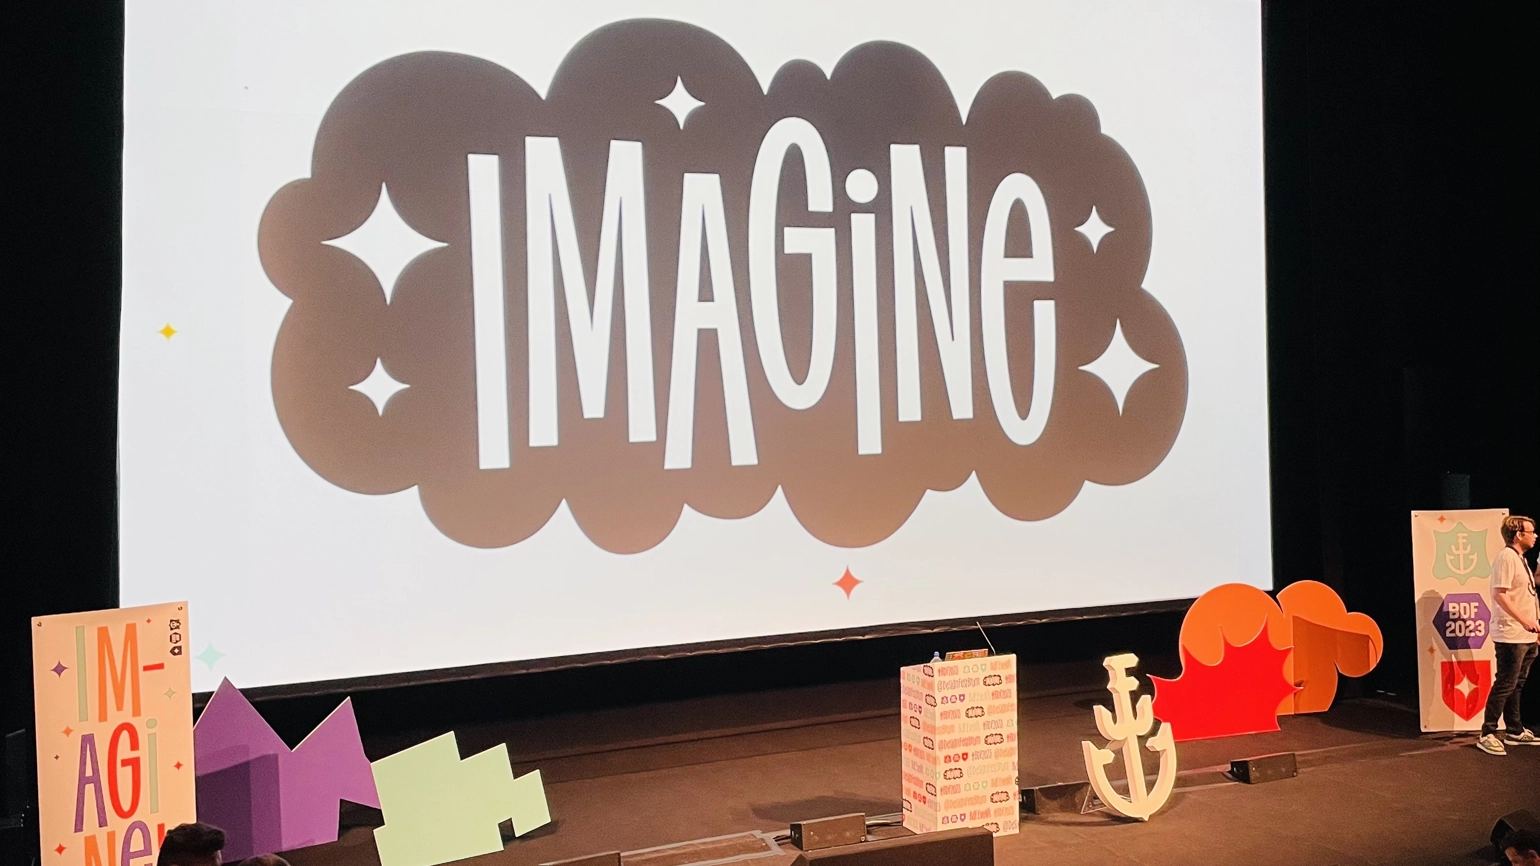 The stage at Birmingham Design Festival, showing a large screen that reads 'Imagine' in a cloud shape